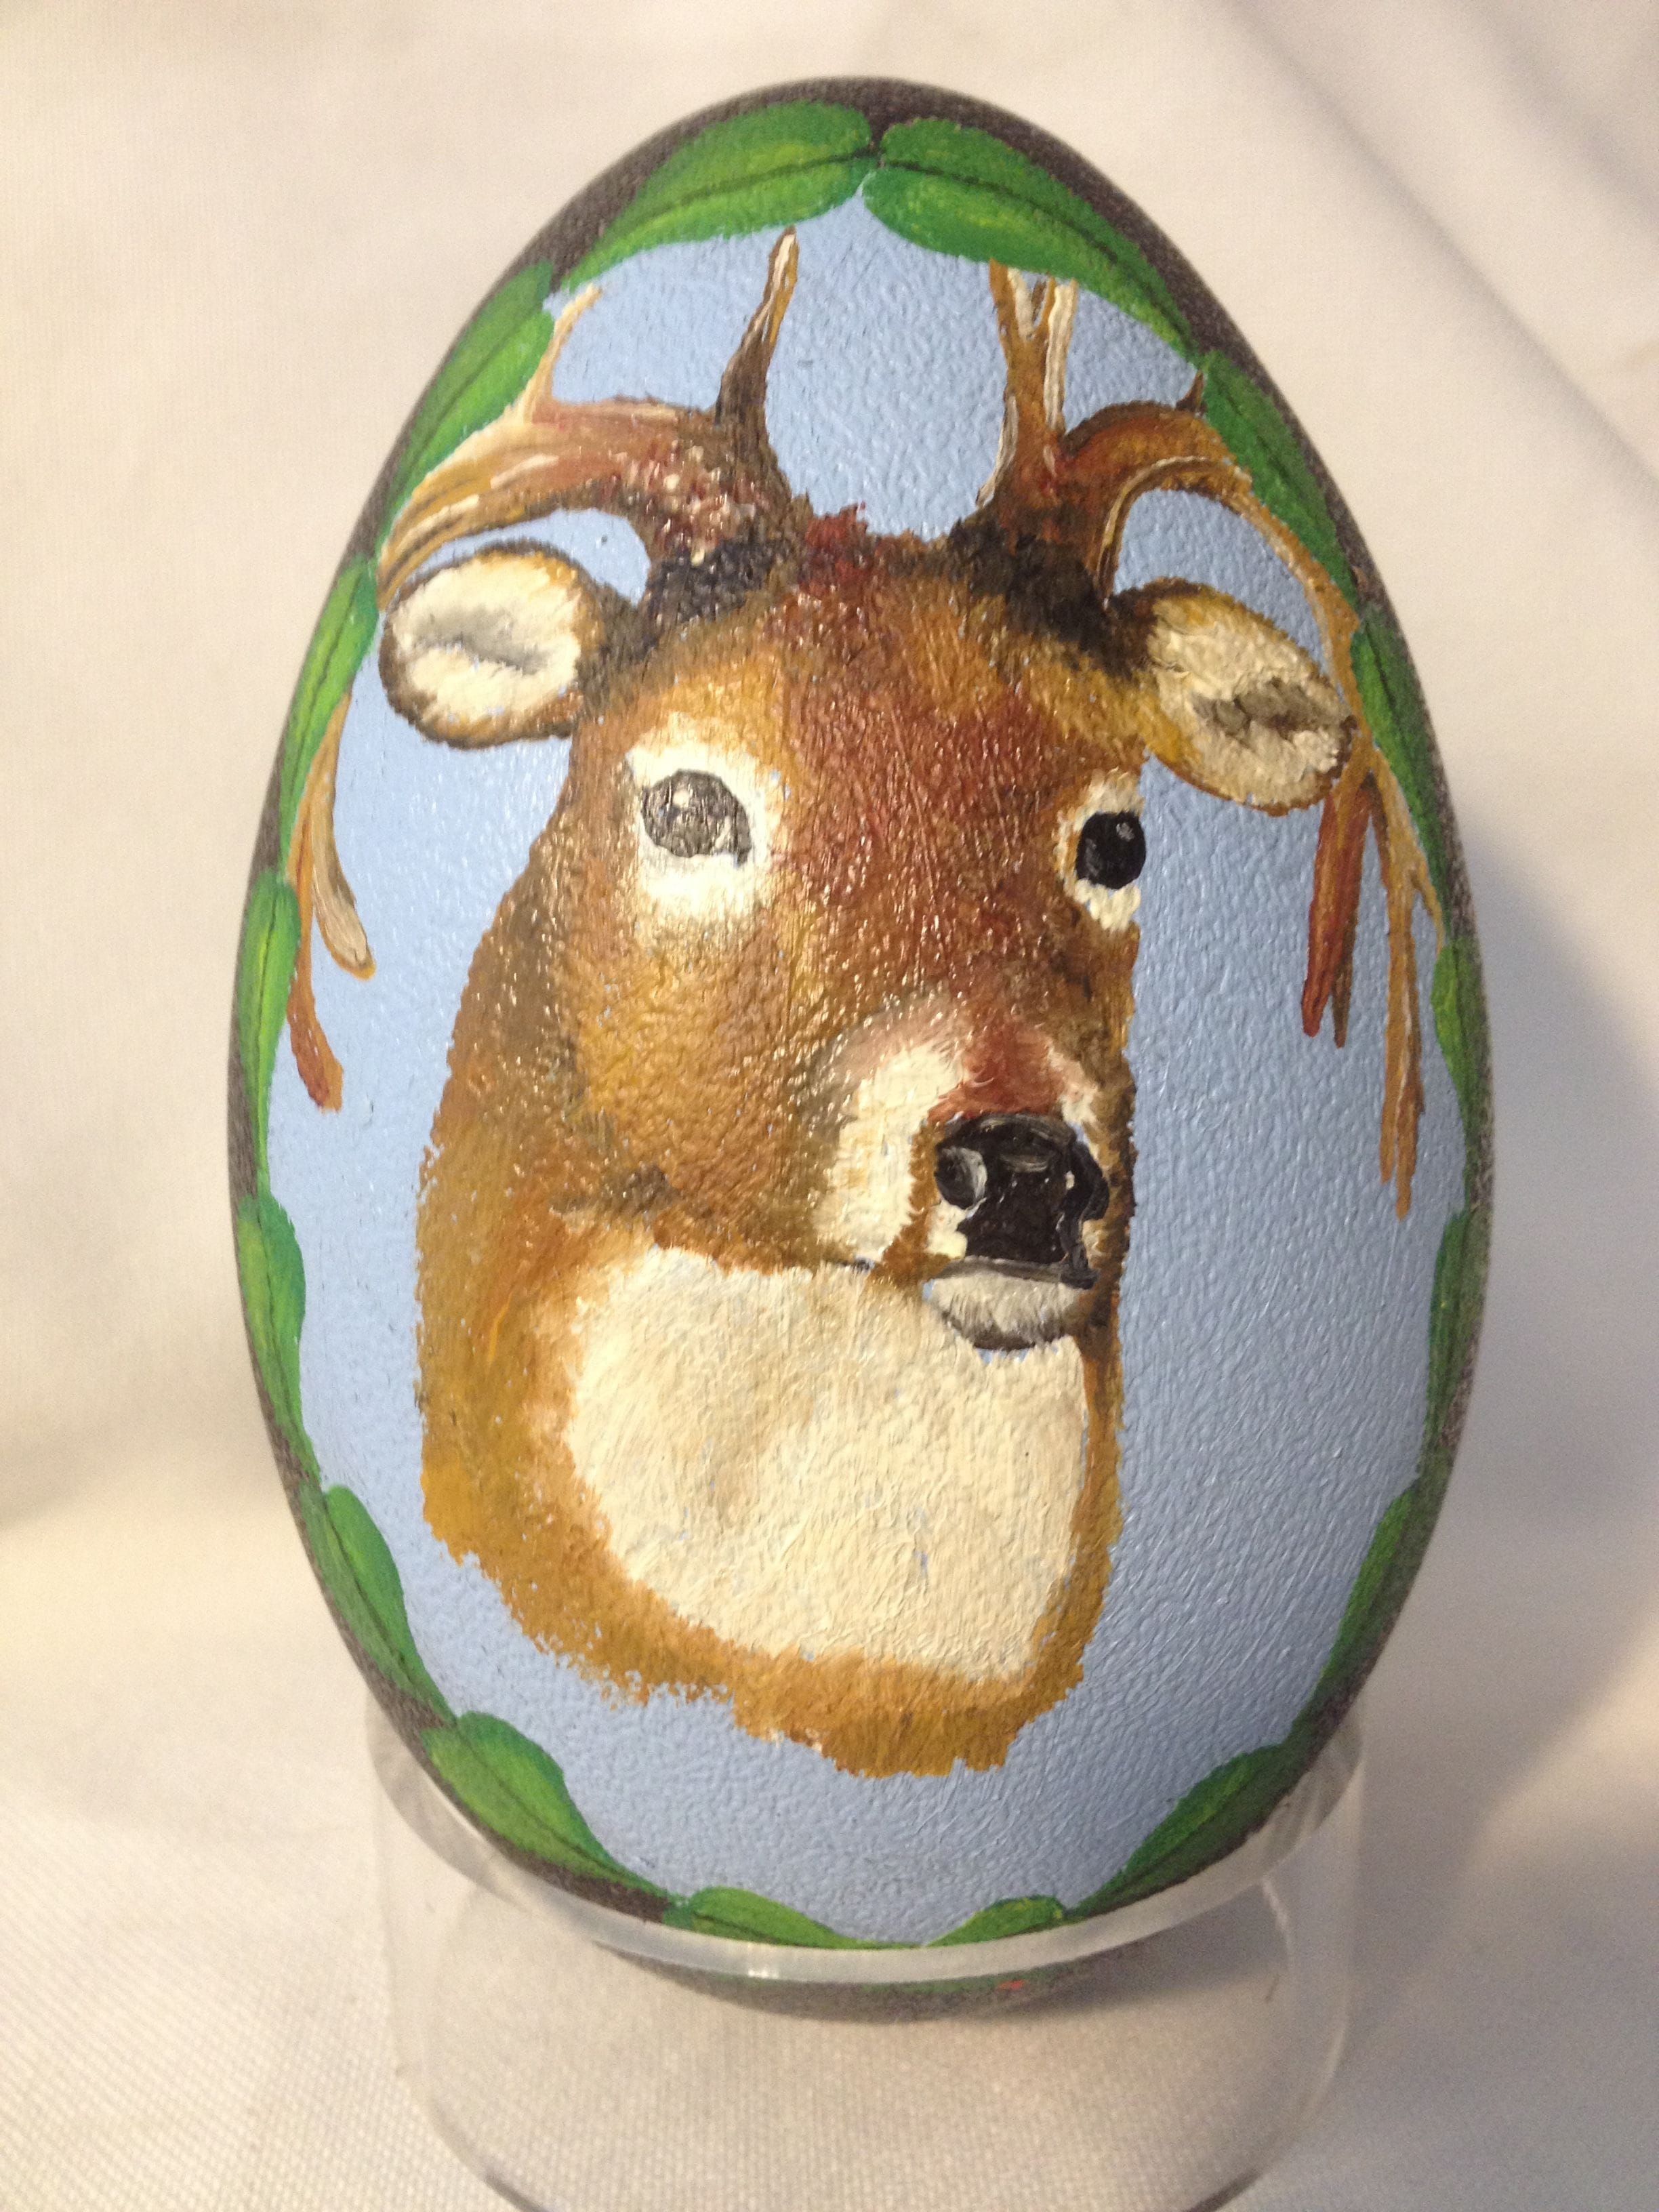 Oil paint on emu egg of close up of buck $40.